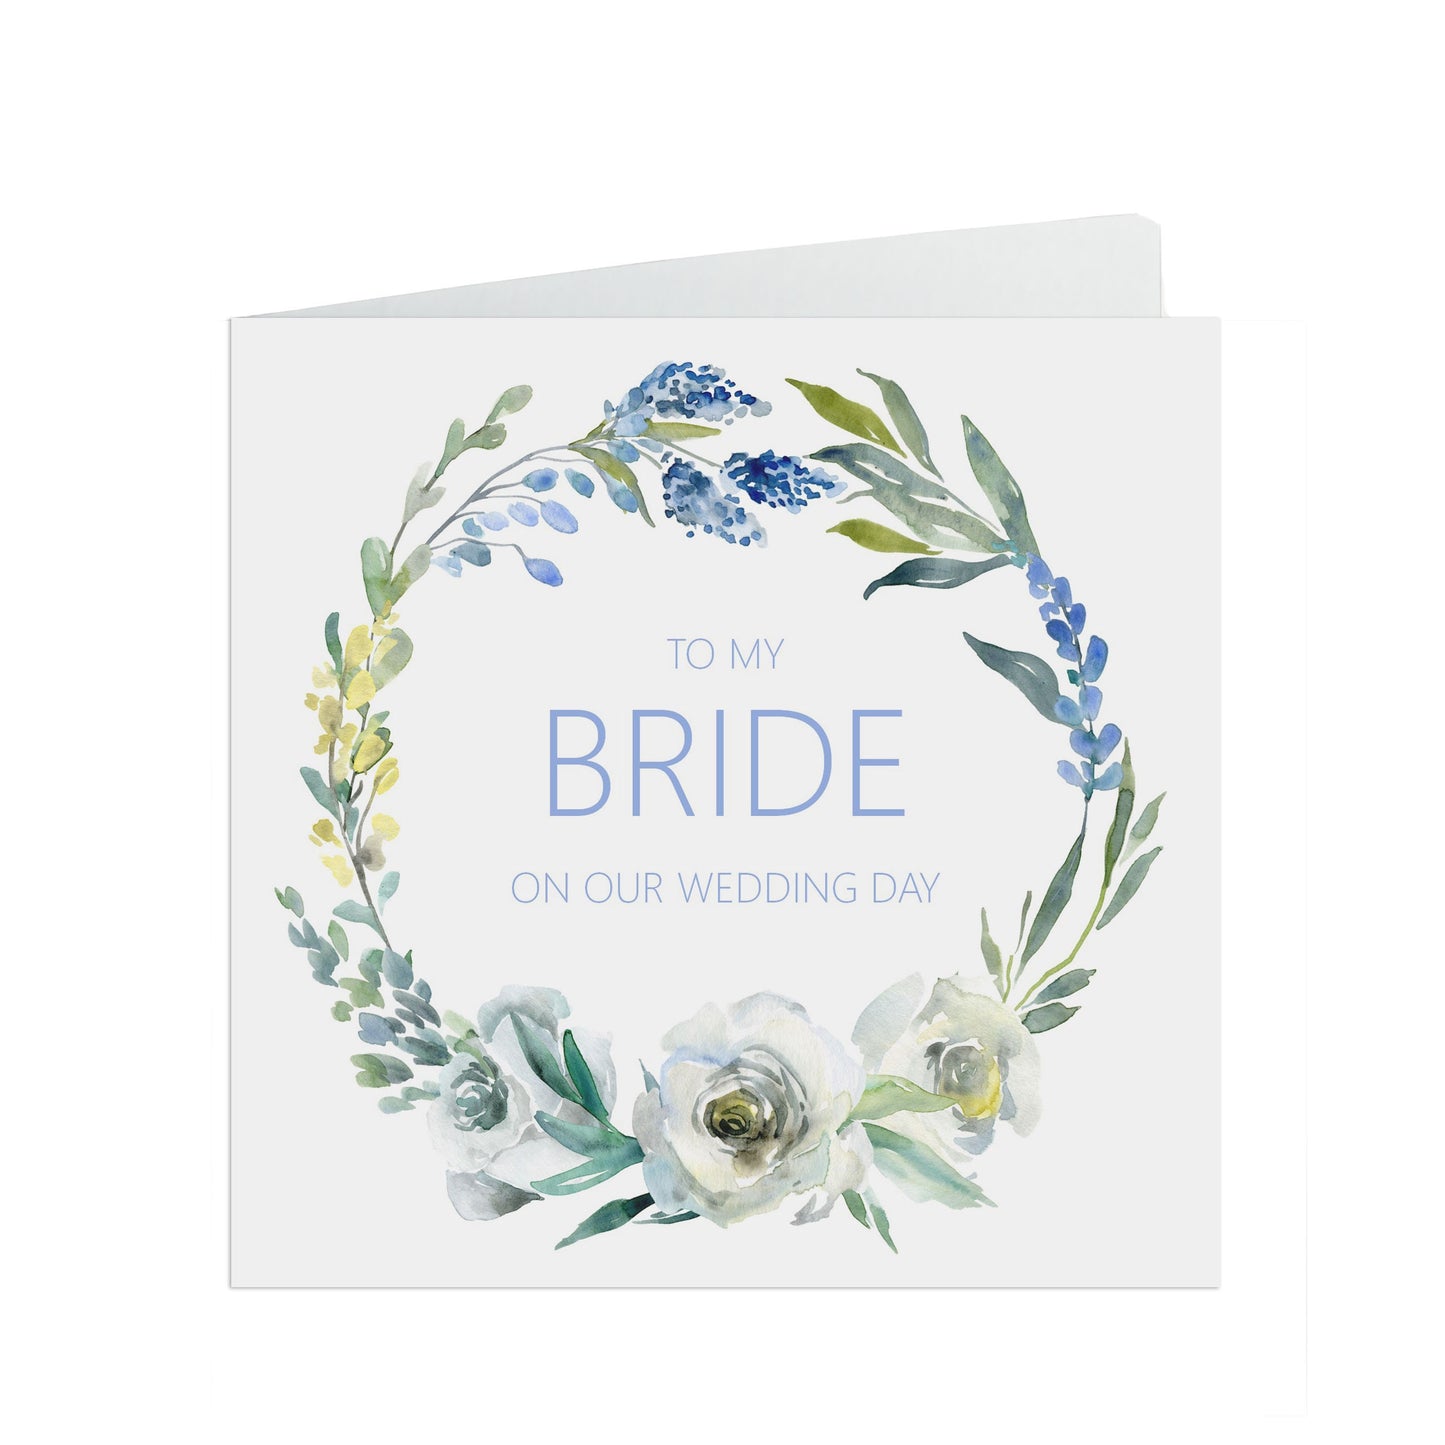 To My Bride On Our Wedding Day Card - Blue Floral